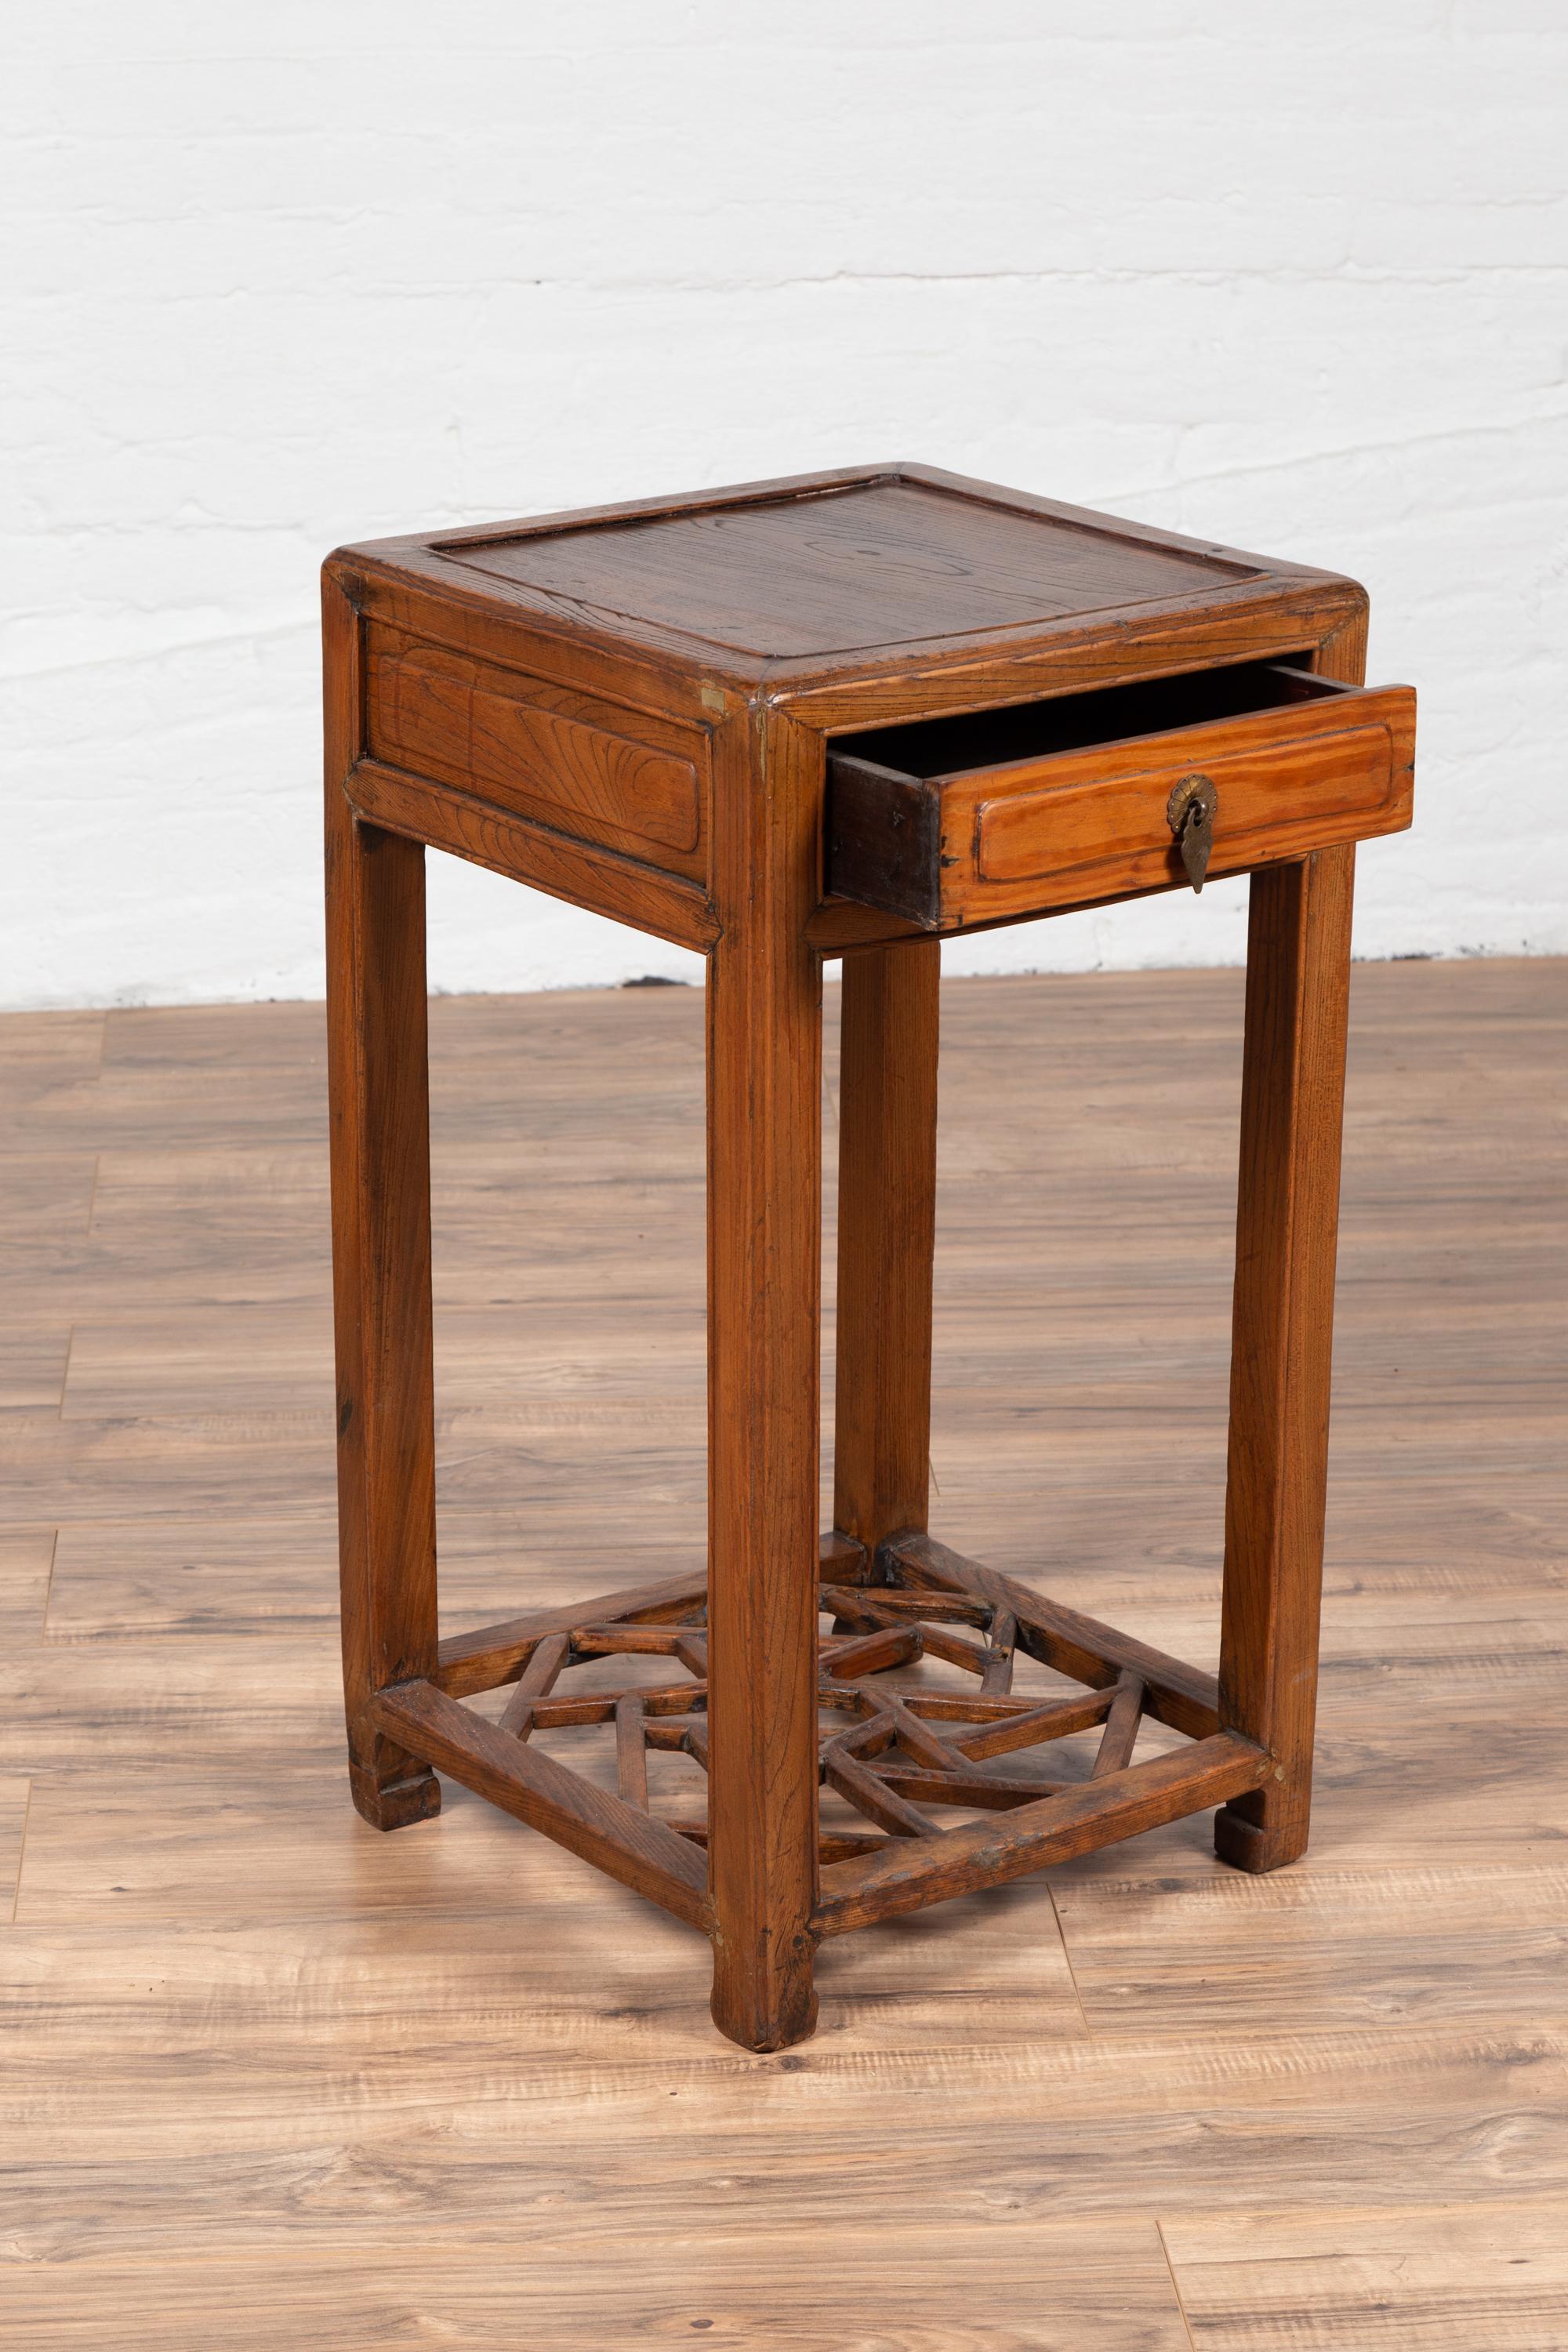 Elmwood Lamp Table with Single Drawer, Horsehoof Feet and Cracked Ice Shelf For Sale 2